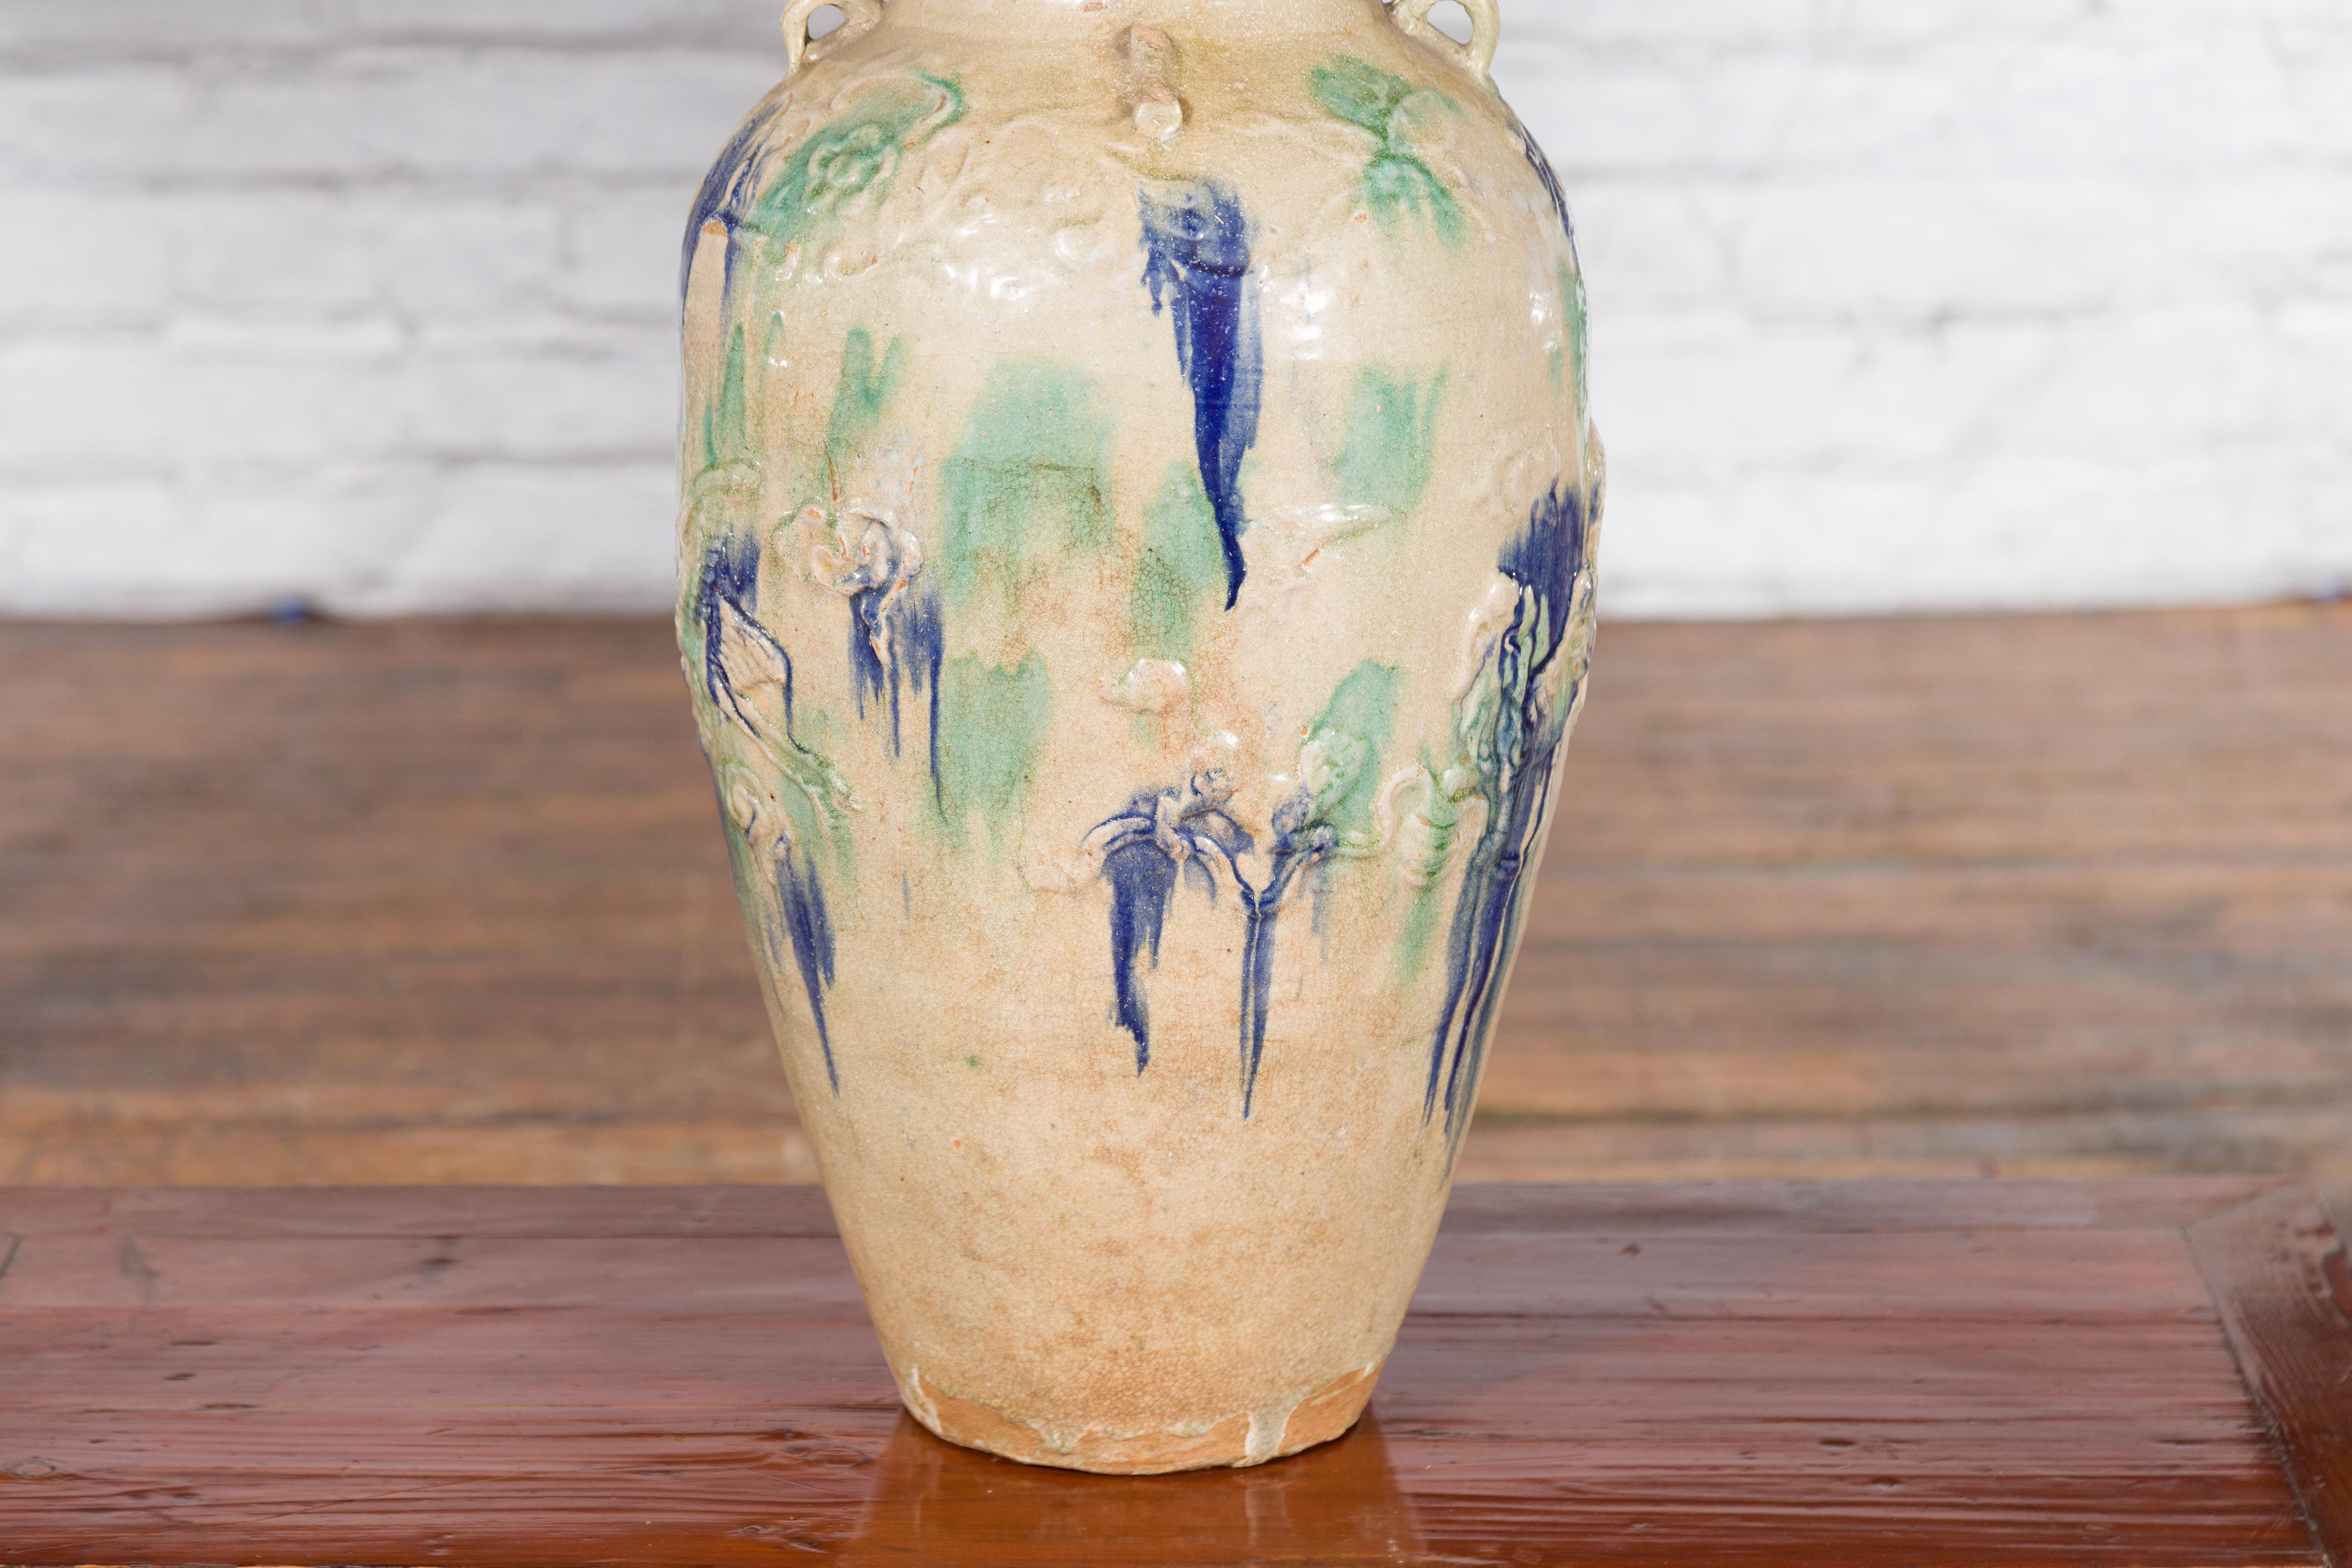 Ceramic Antique Annamese 19th Century Storage Vessel with Green and Blue Glazed Effects For Sale